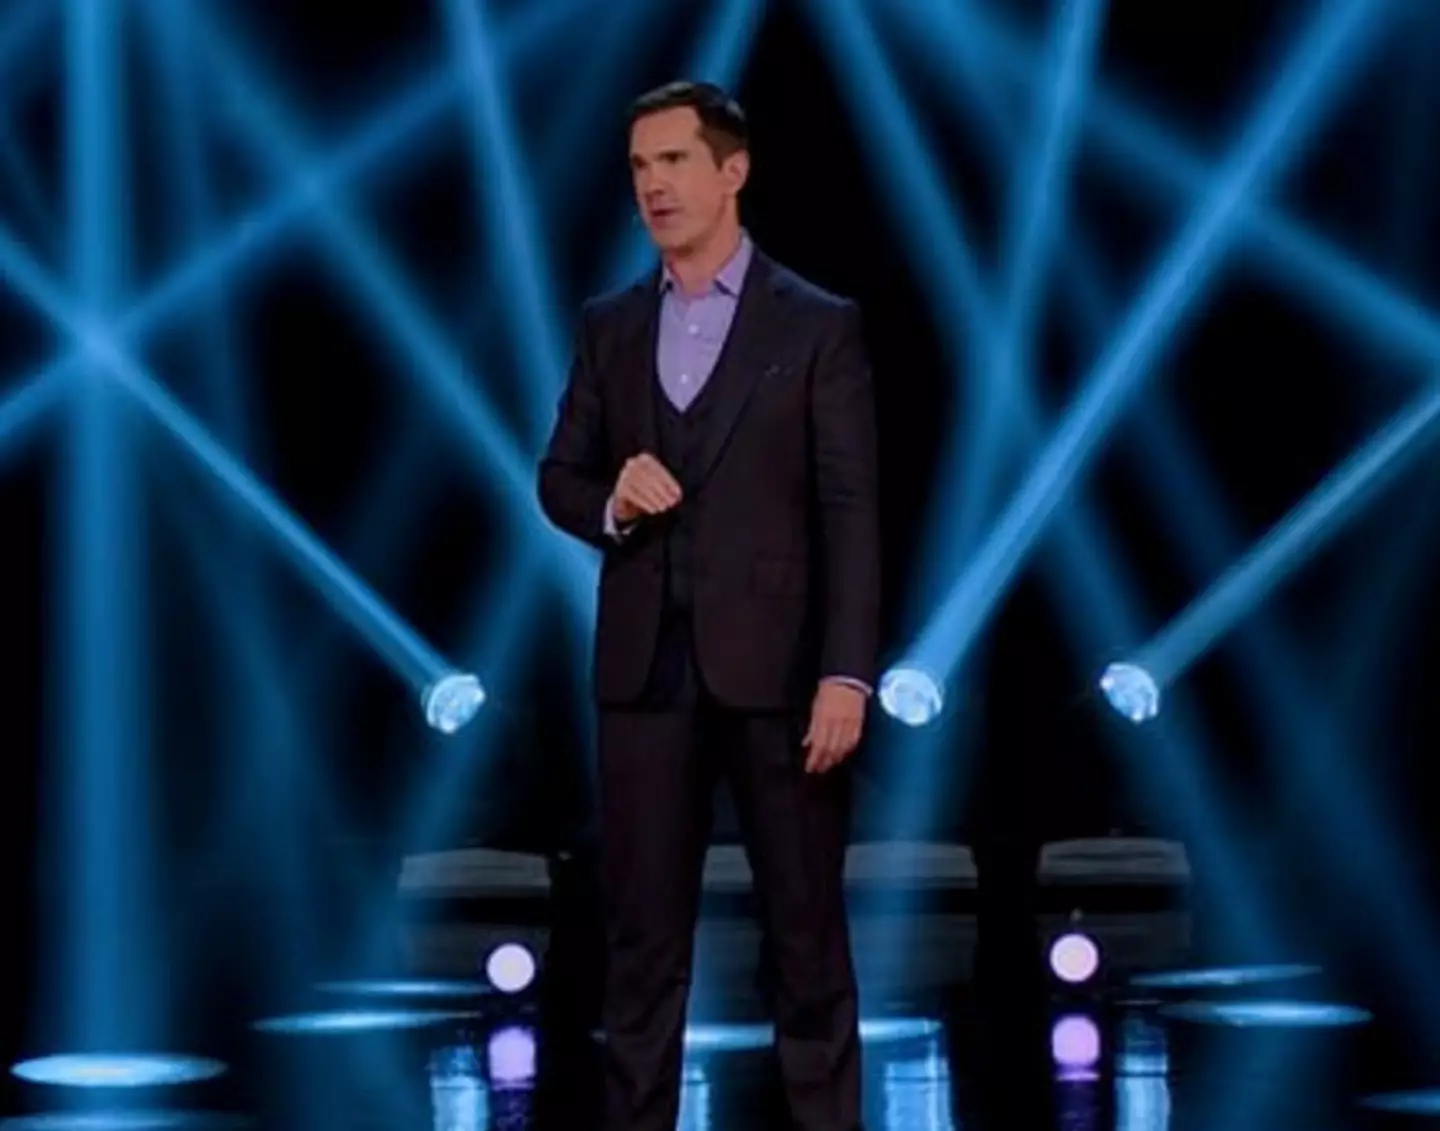 Jimmy Carr has been heavily criticised for comments he made about the Holocaust.